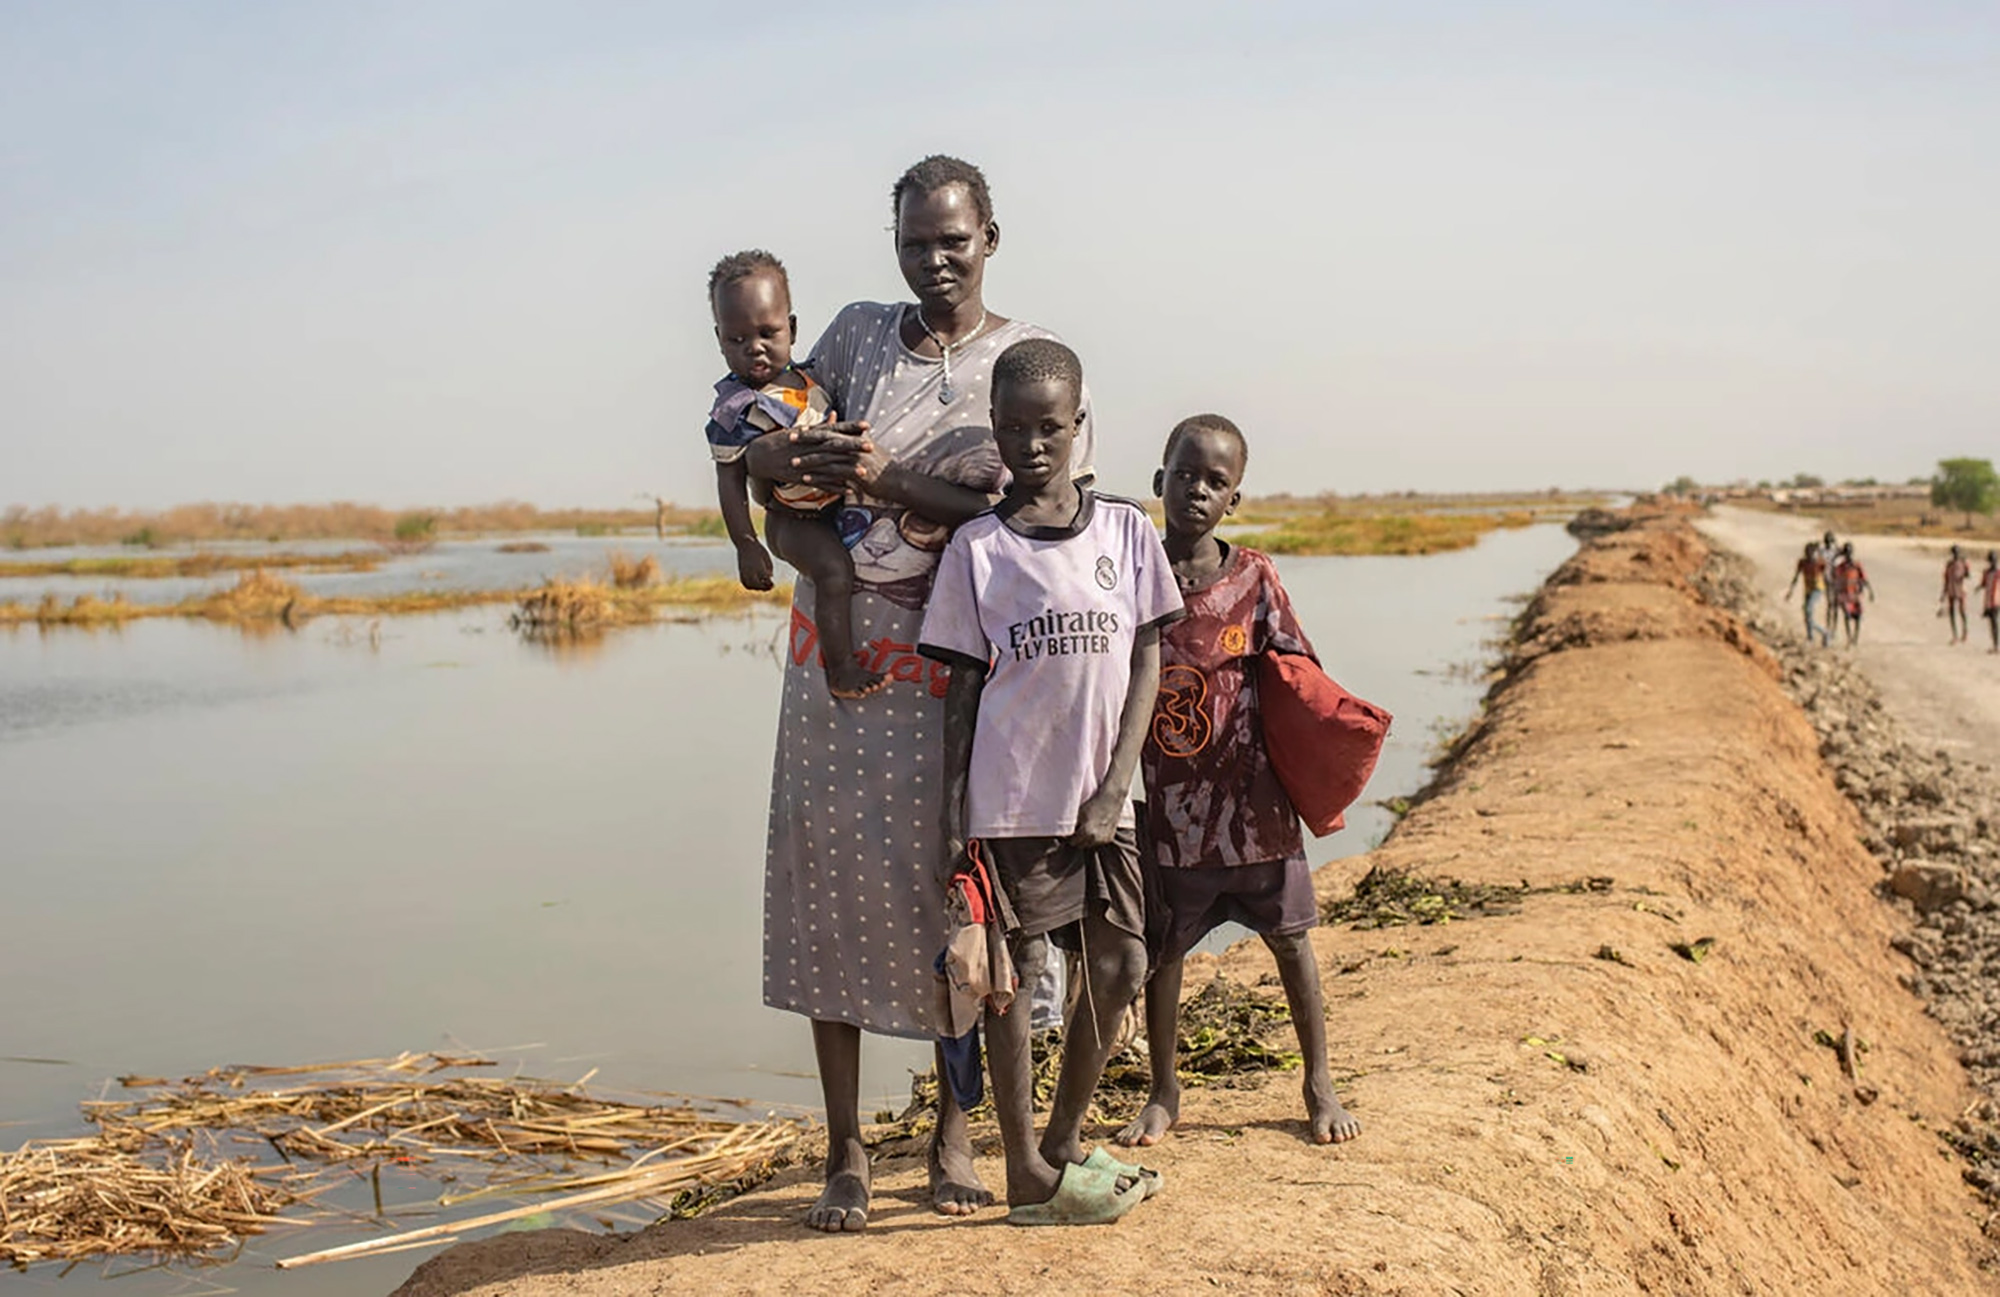 A South Sudanese woman and her three children in front of a body of water next to a narrow path.